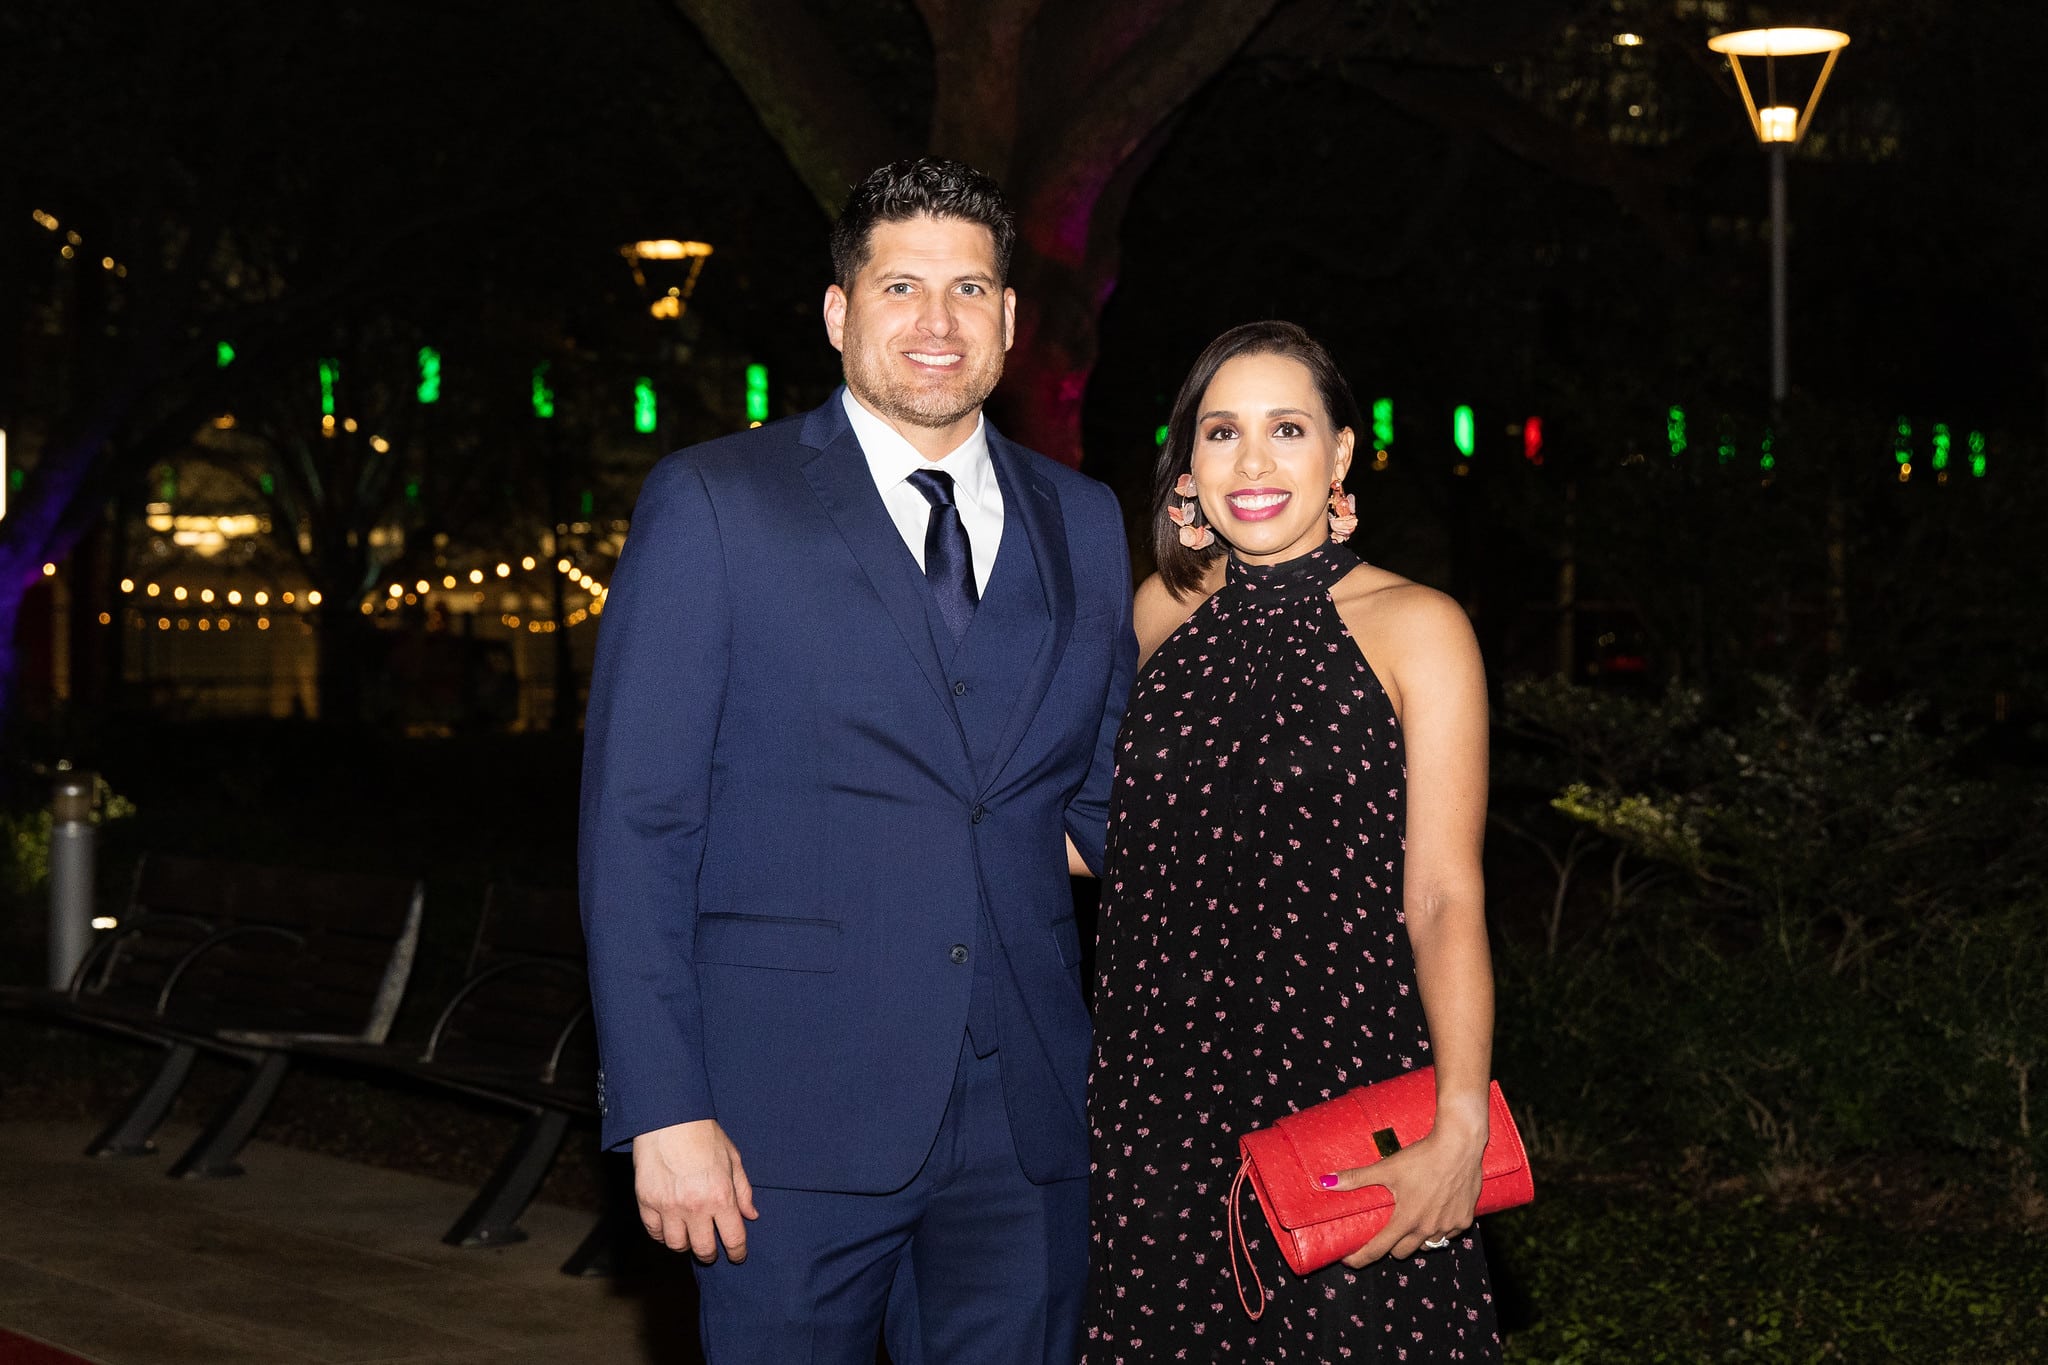 From L-R: Jason Salas, Lacey Dalcour Salas  Gala on the Green® at Discovery Green in downtown Houston. February 23, 2023. Photo: Lawrence Elizabeth Knox